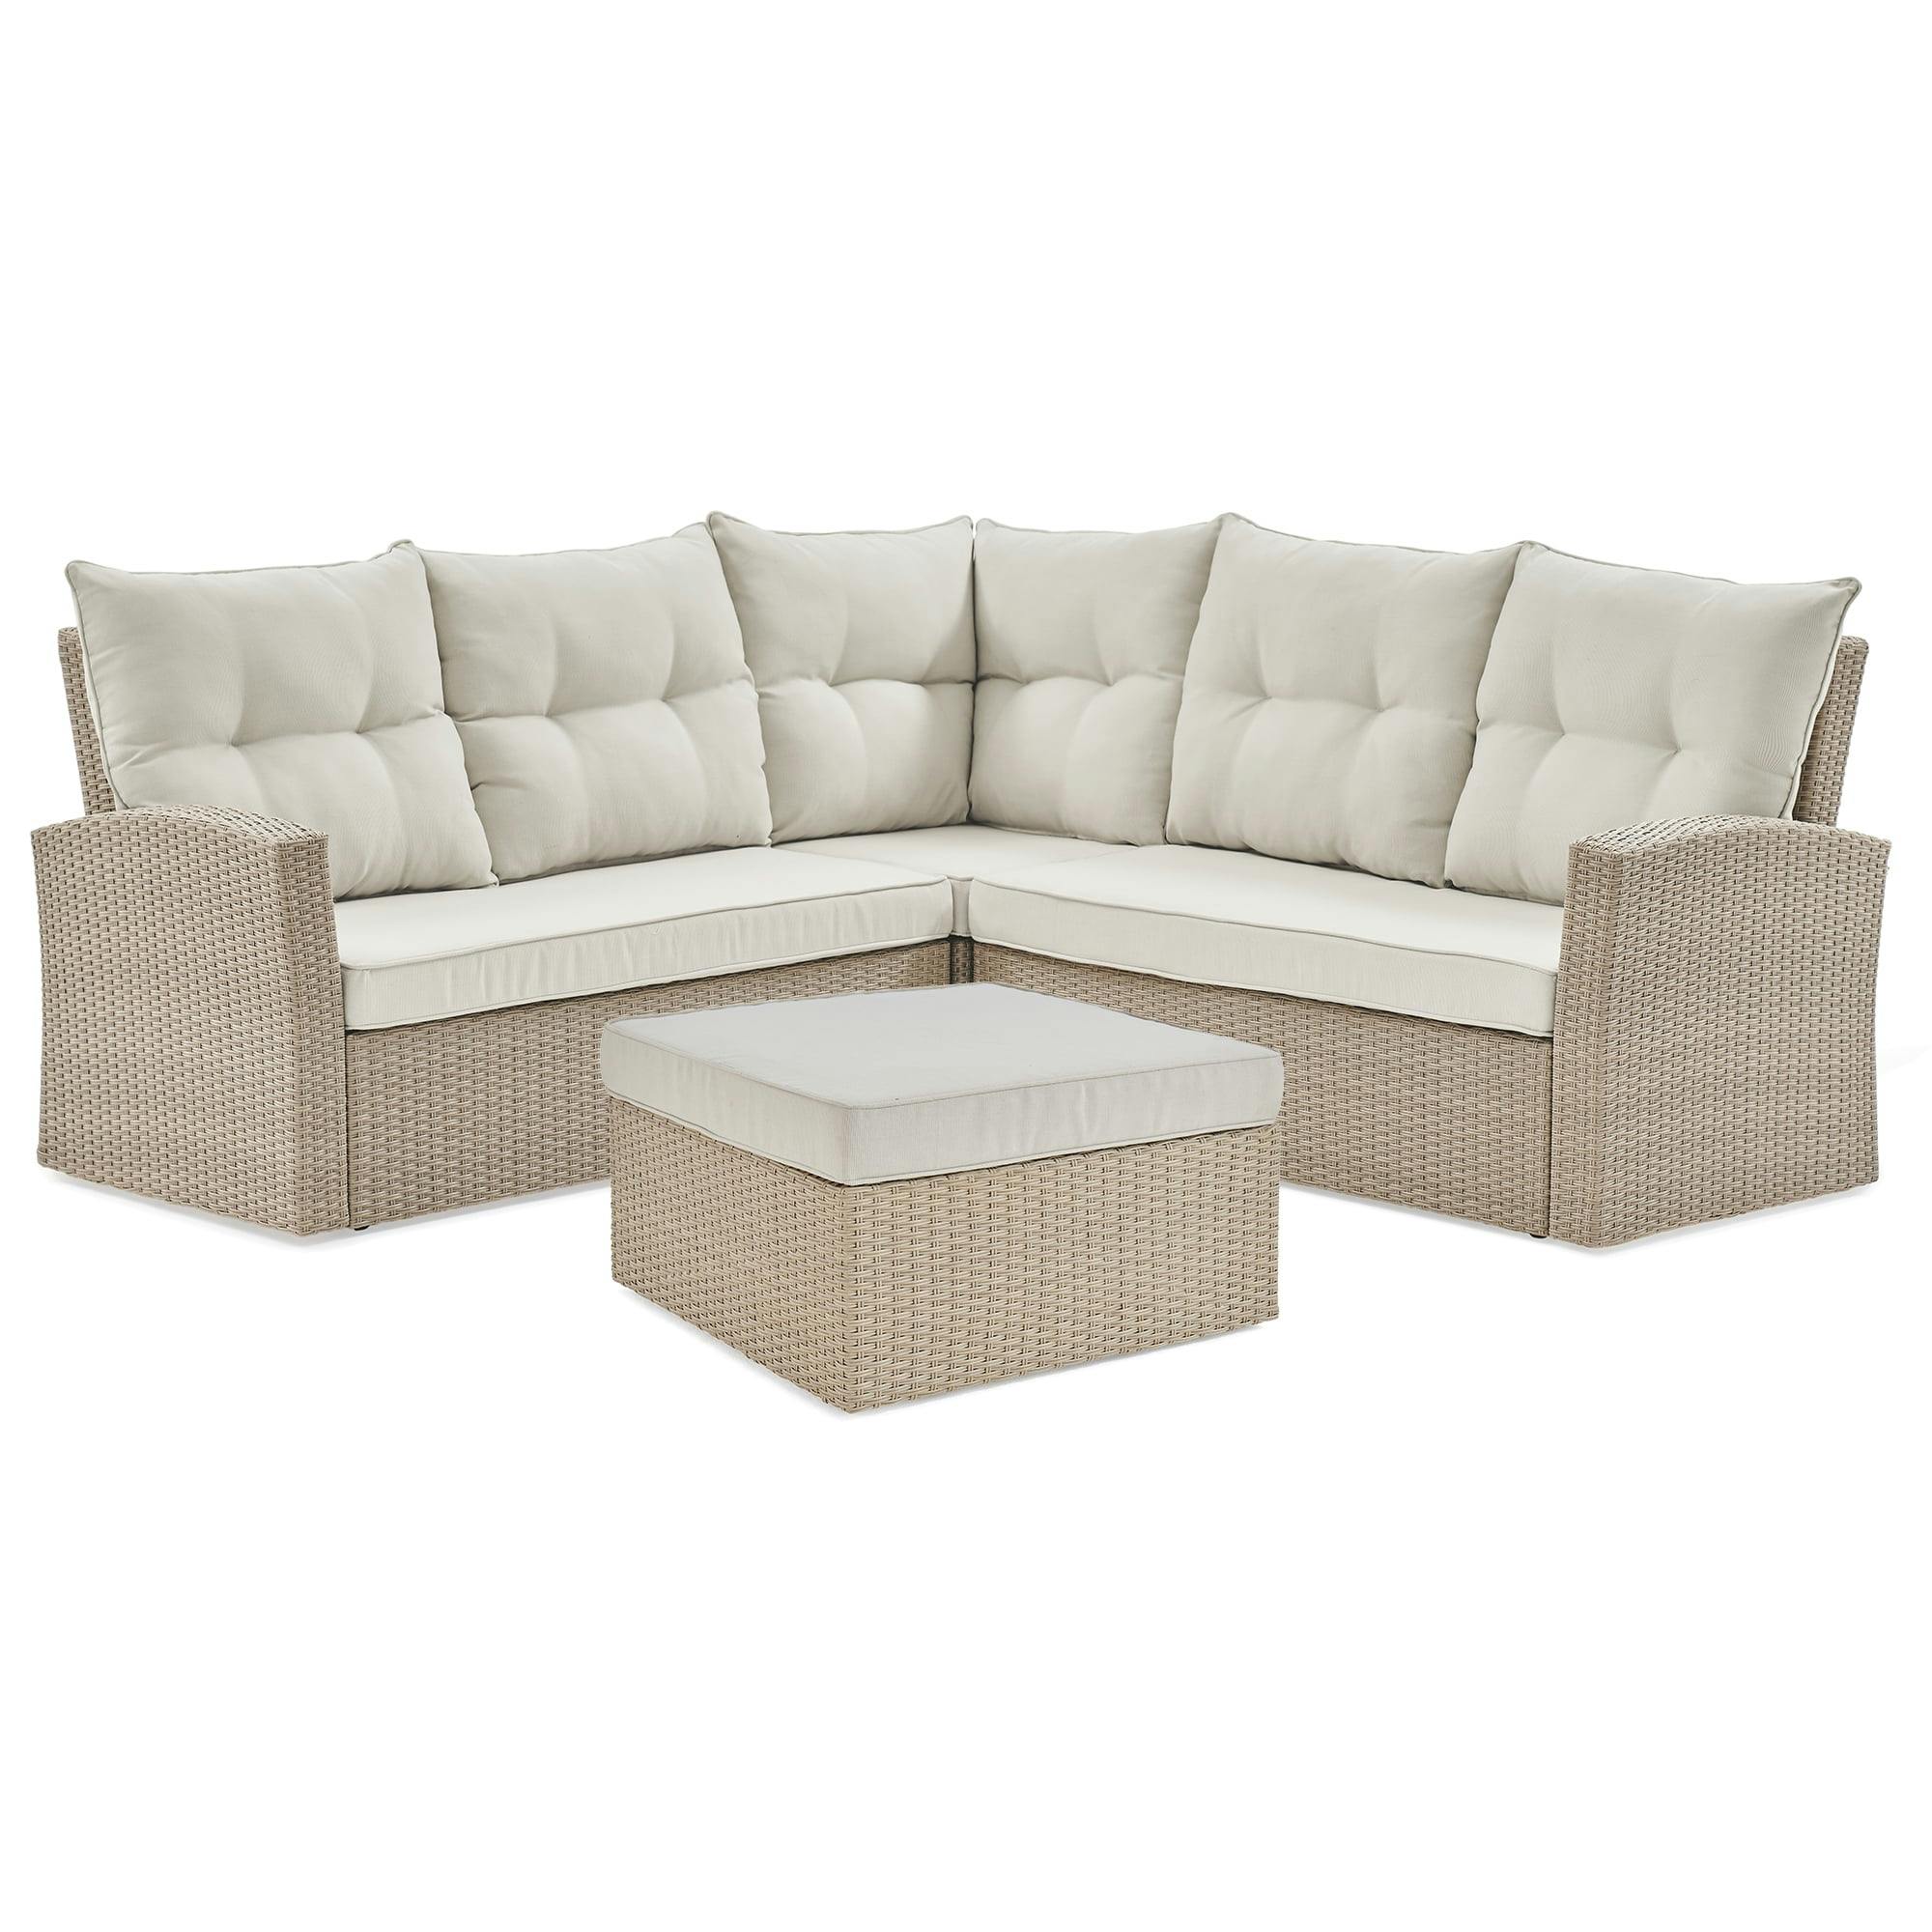 Canaan Contemporary All-Weather Wicker 6-Person Outdoor Loveseat Set